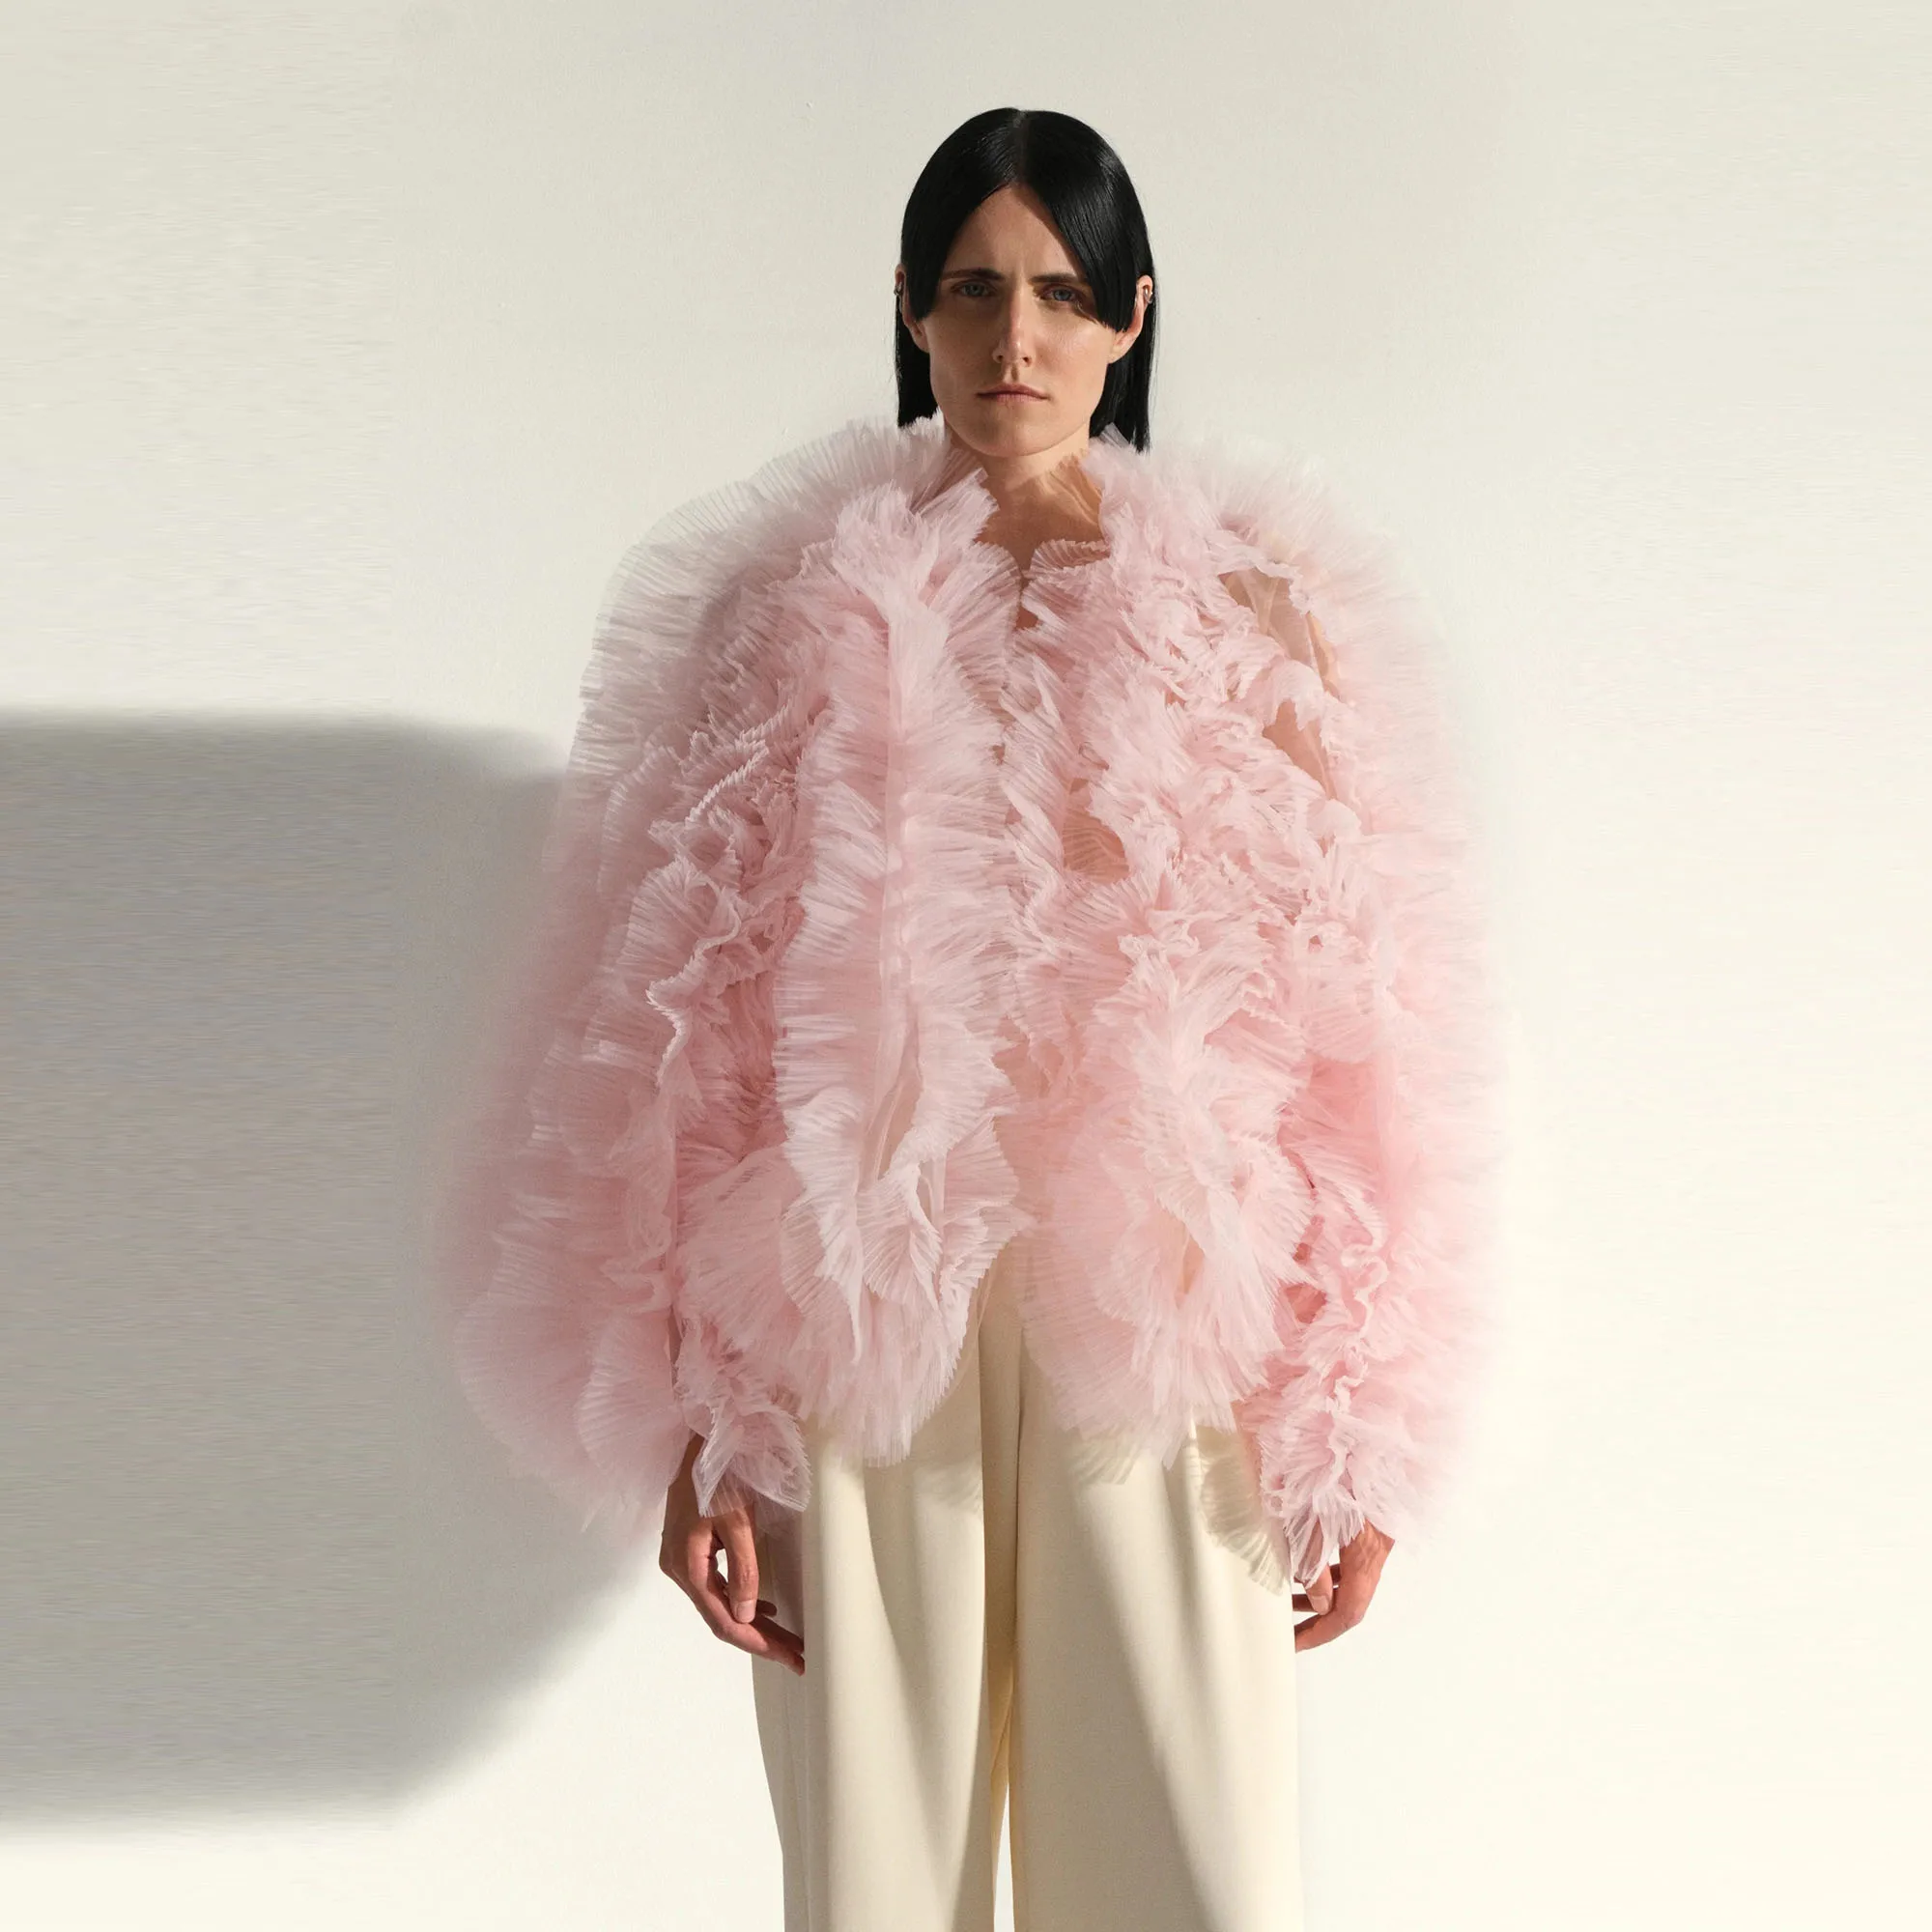 Fashion Pink Fluffy Ruffles Tulle Women Jacket Full Sleeves Open Front Middle Length Women Coat Outfit Female Outwear